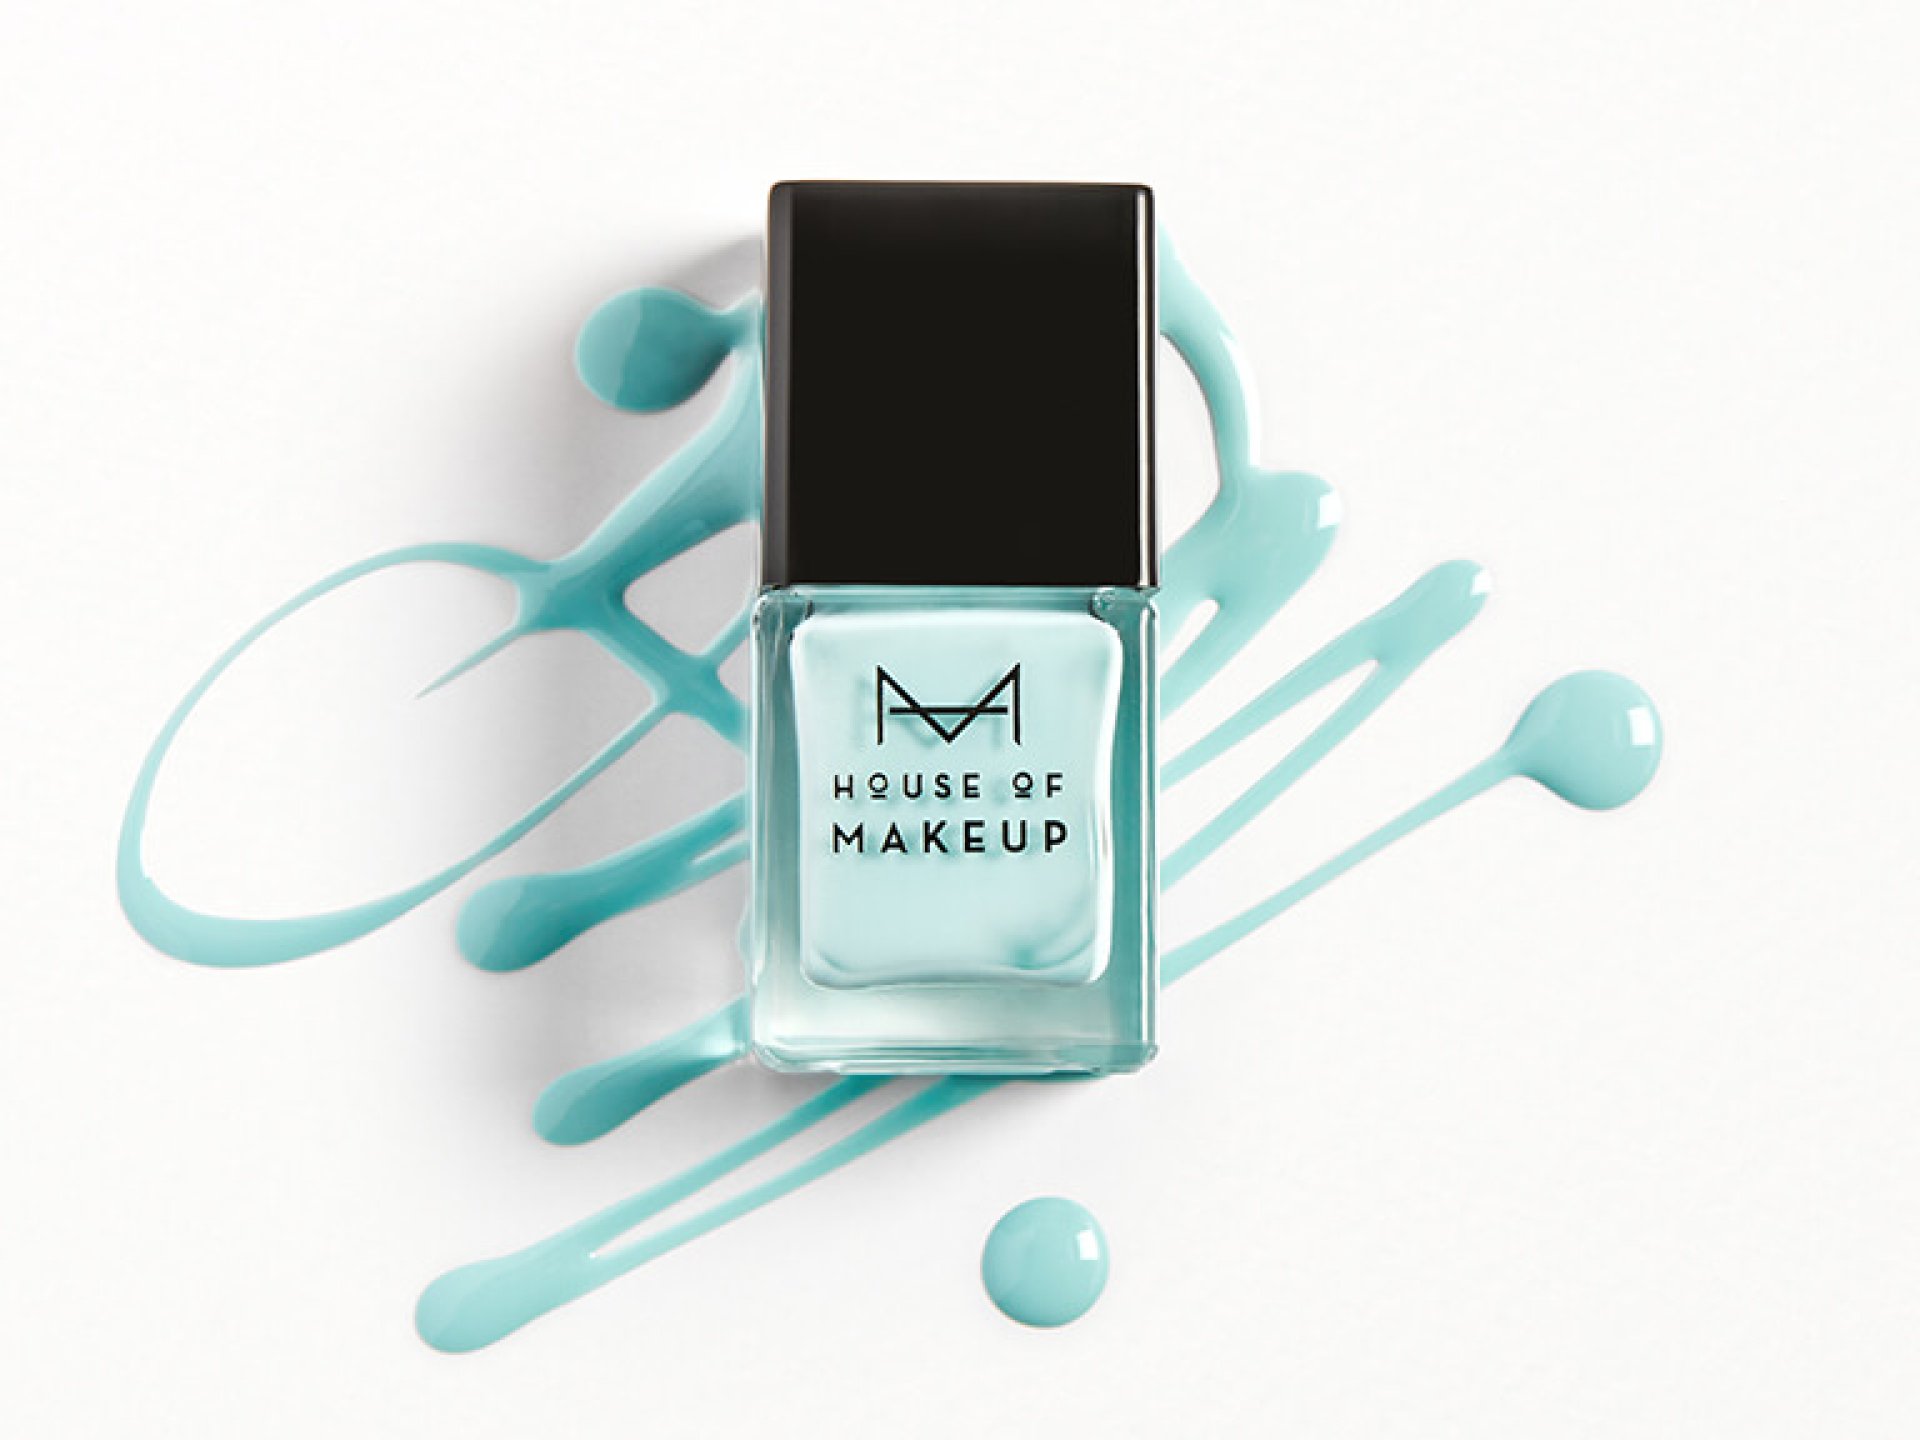 HOUSE OF MAKEUP Nail Lacquer in Frozen